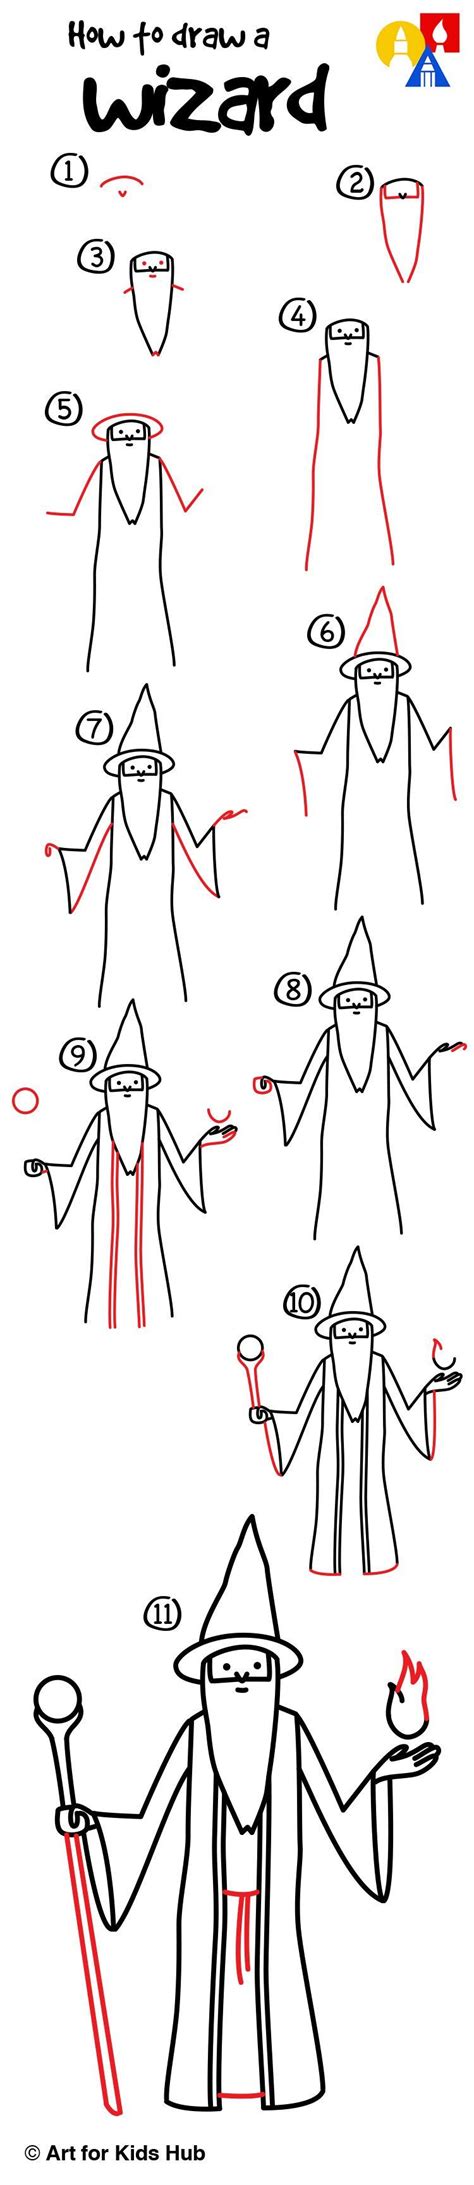 How To Draw A Wizard Art For Kids Hub Art For Kids Hub Wizard